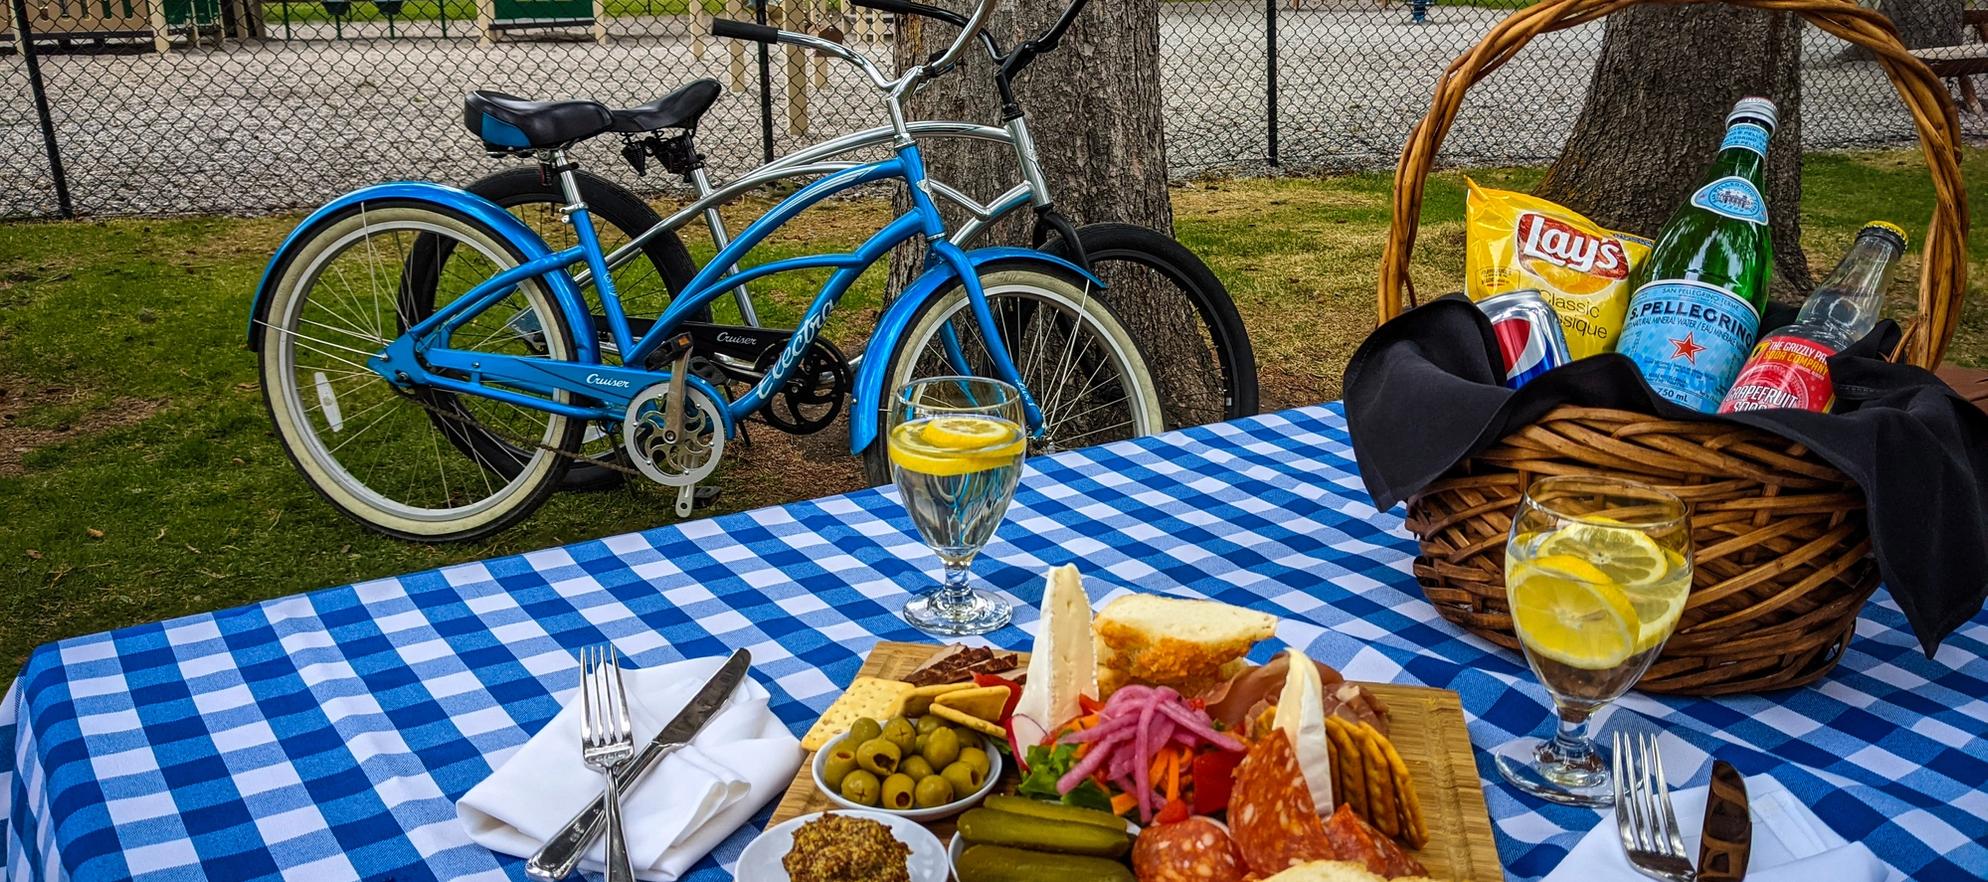 A picnic spread including a charcuterie board and sparkling water on a blue checkered blanket